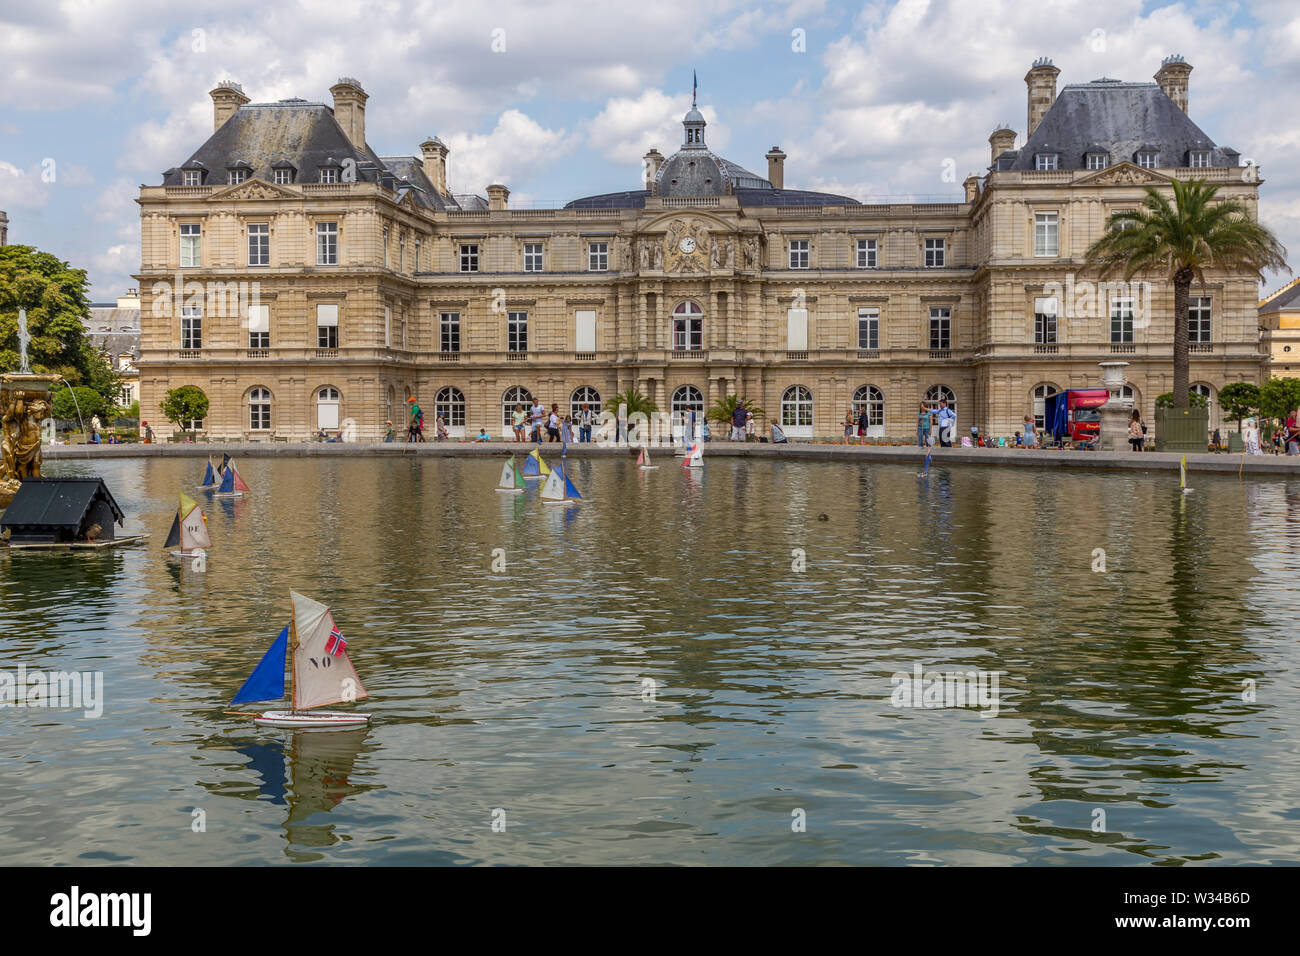 Paris, France - August 5, 2014: casual scenes at the Jardin du Luxembourg park at Paris, with people, boats and the palace Stock Photo